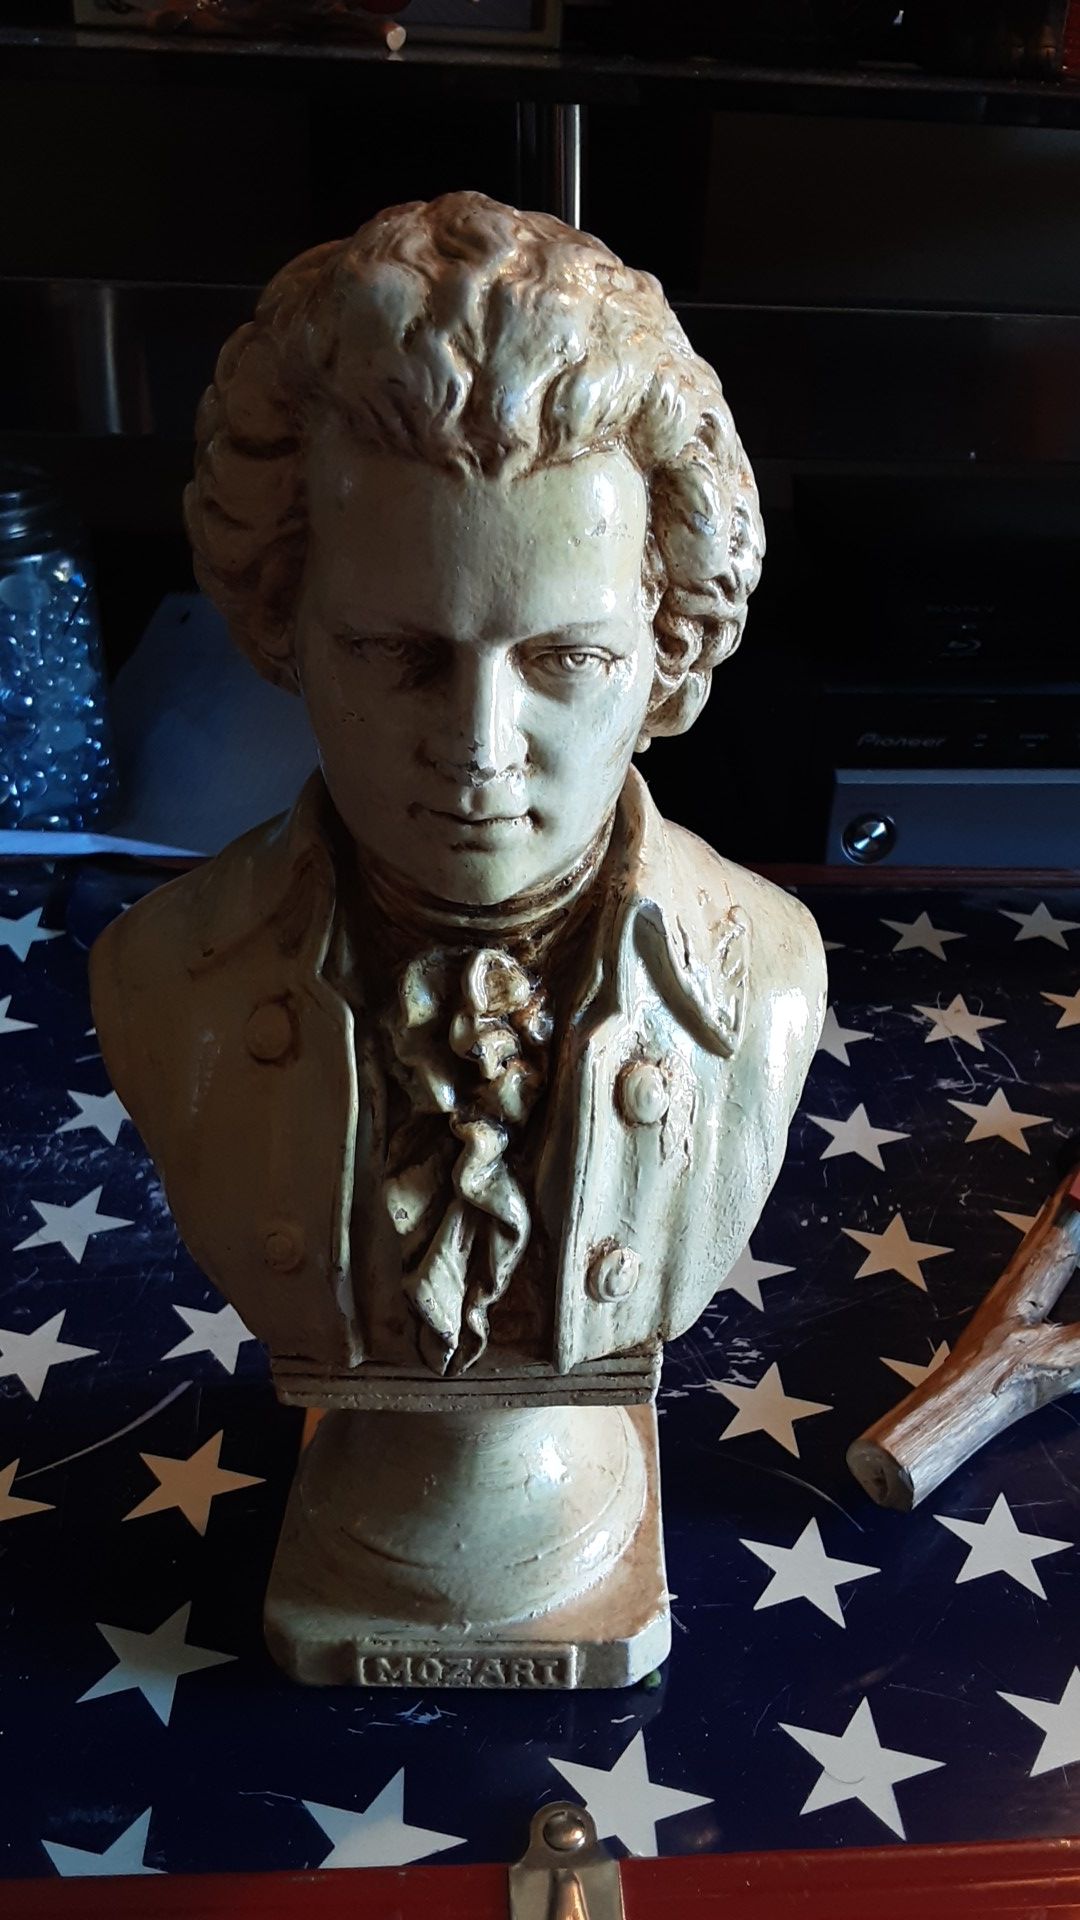 Caproni collection museum quality MOZART bust